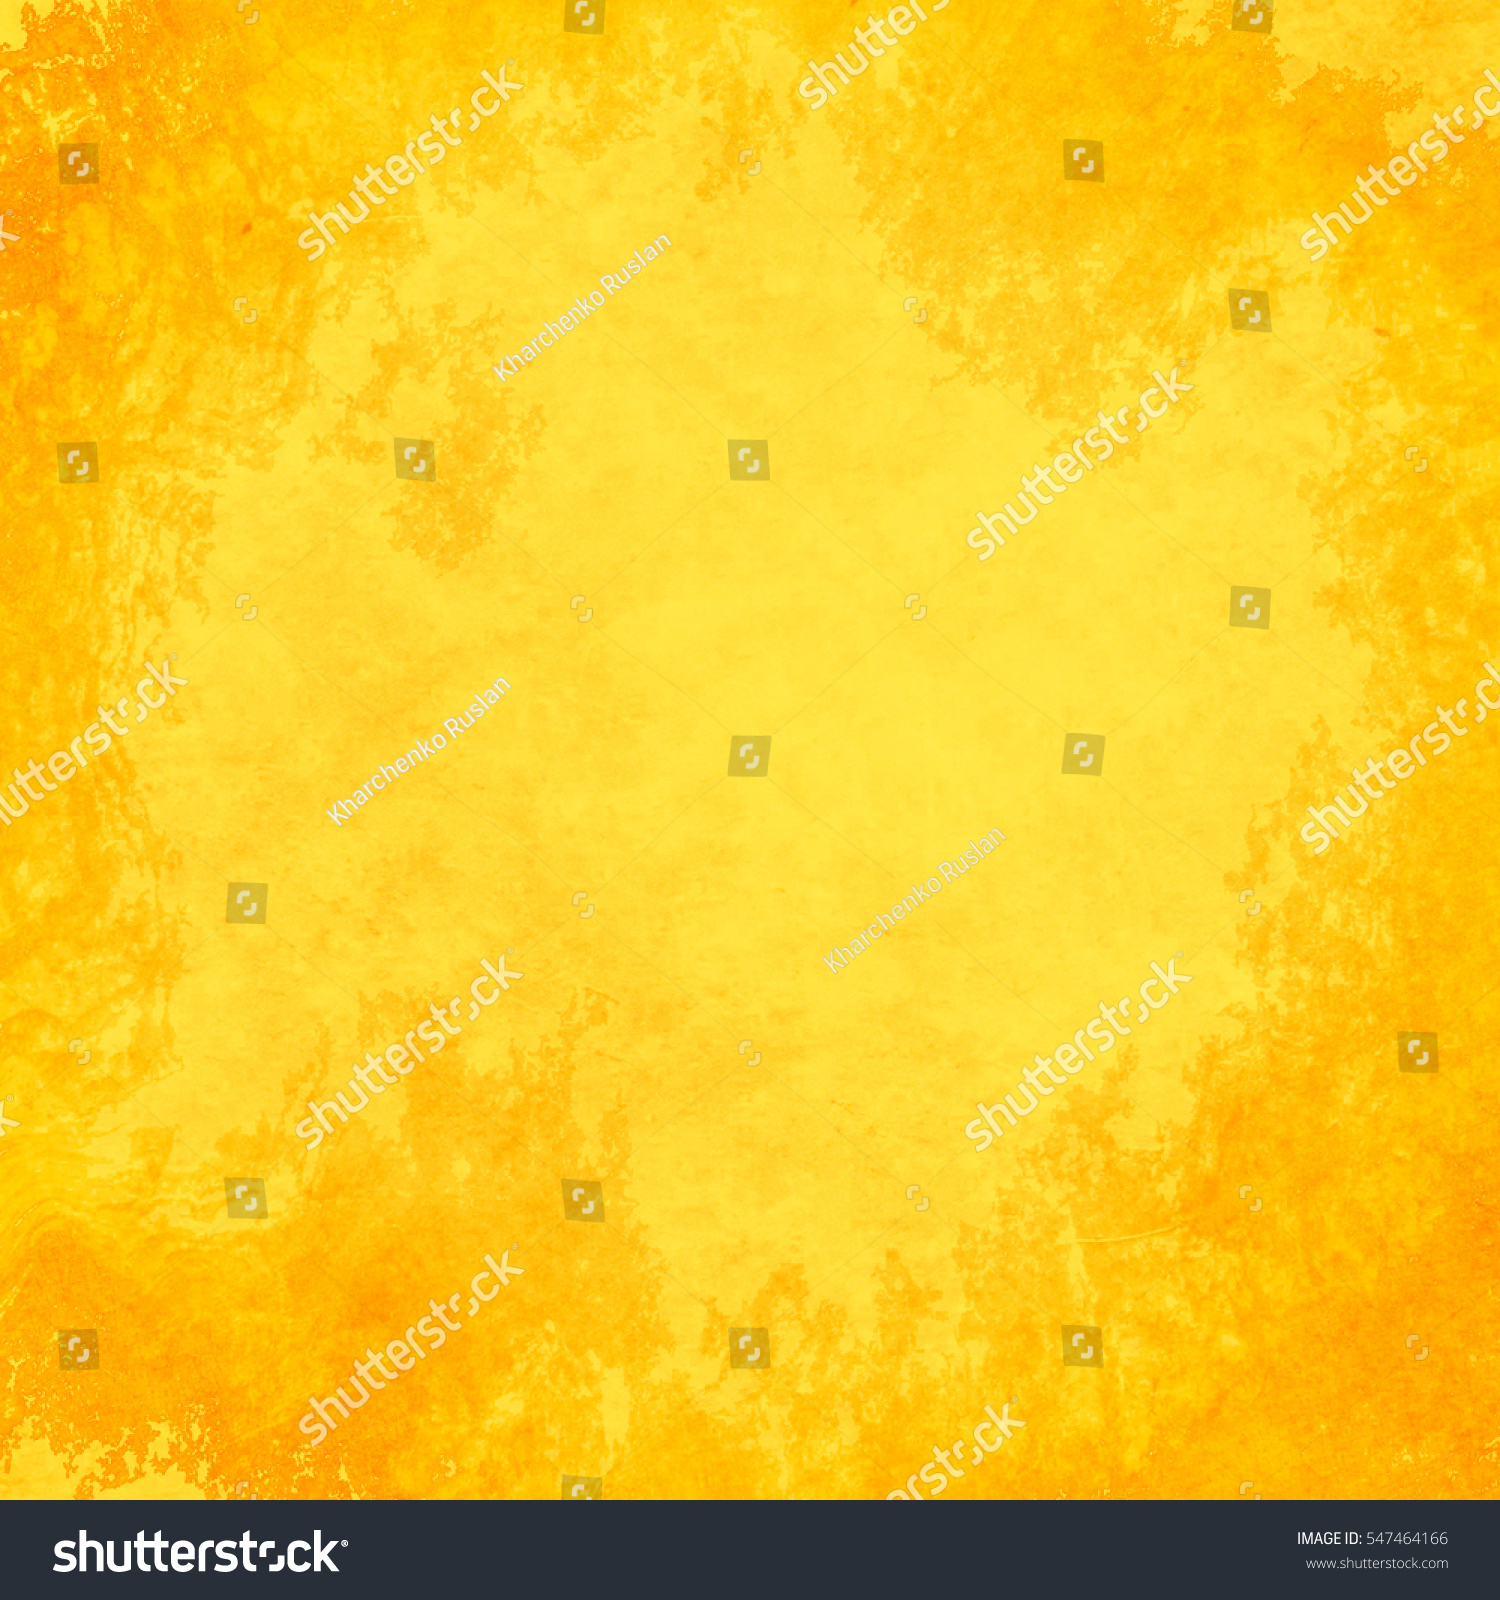 abstract yellow background texture #547464166